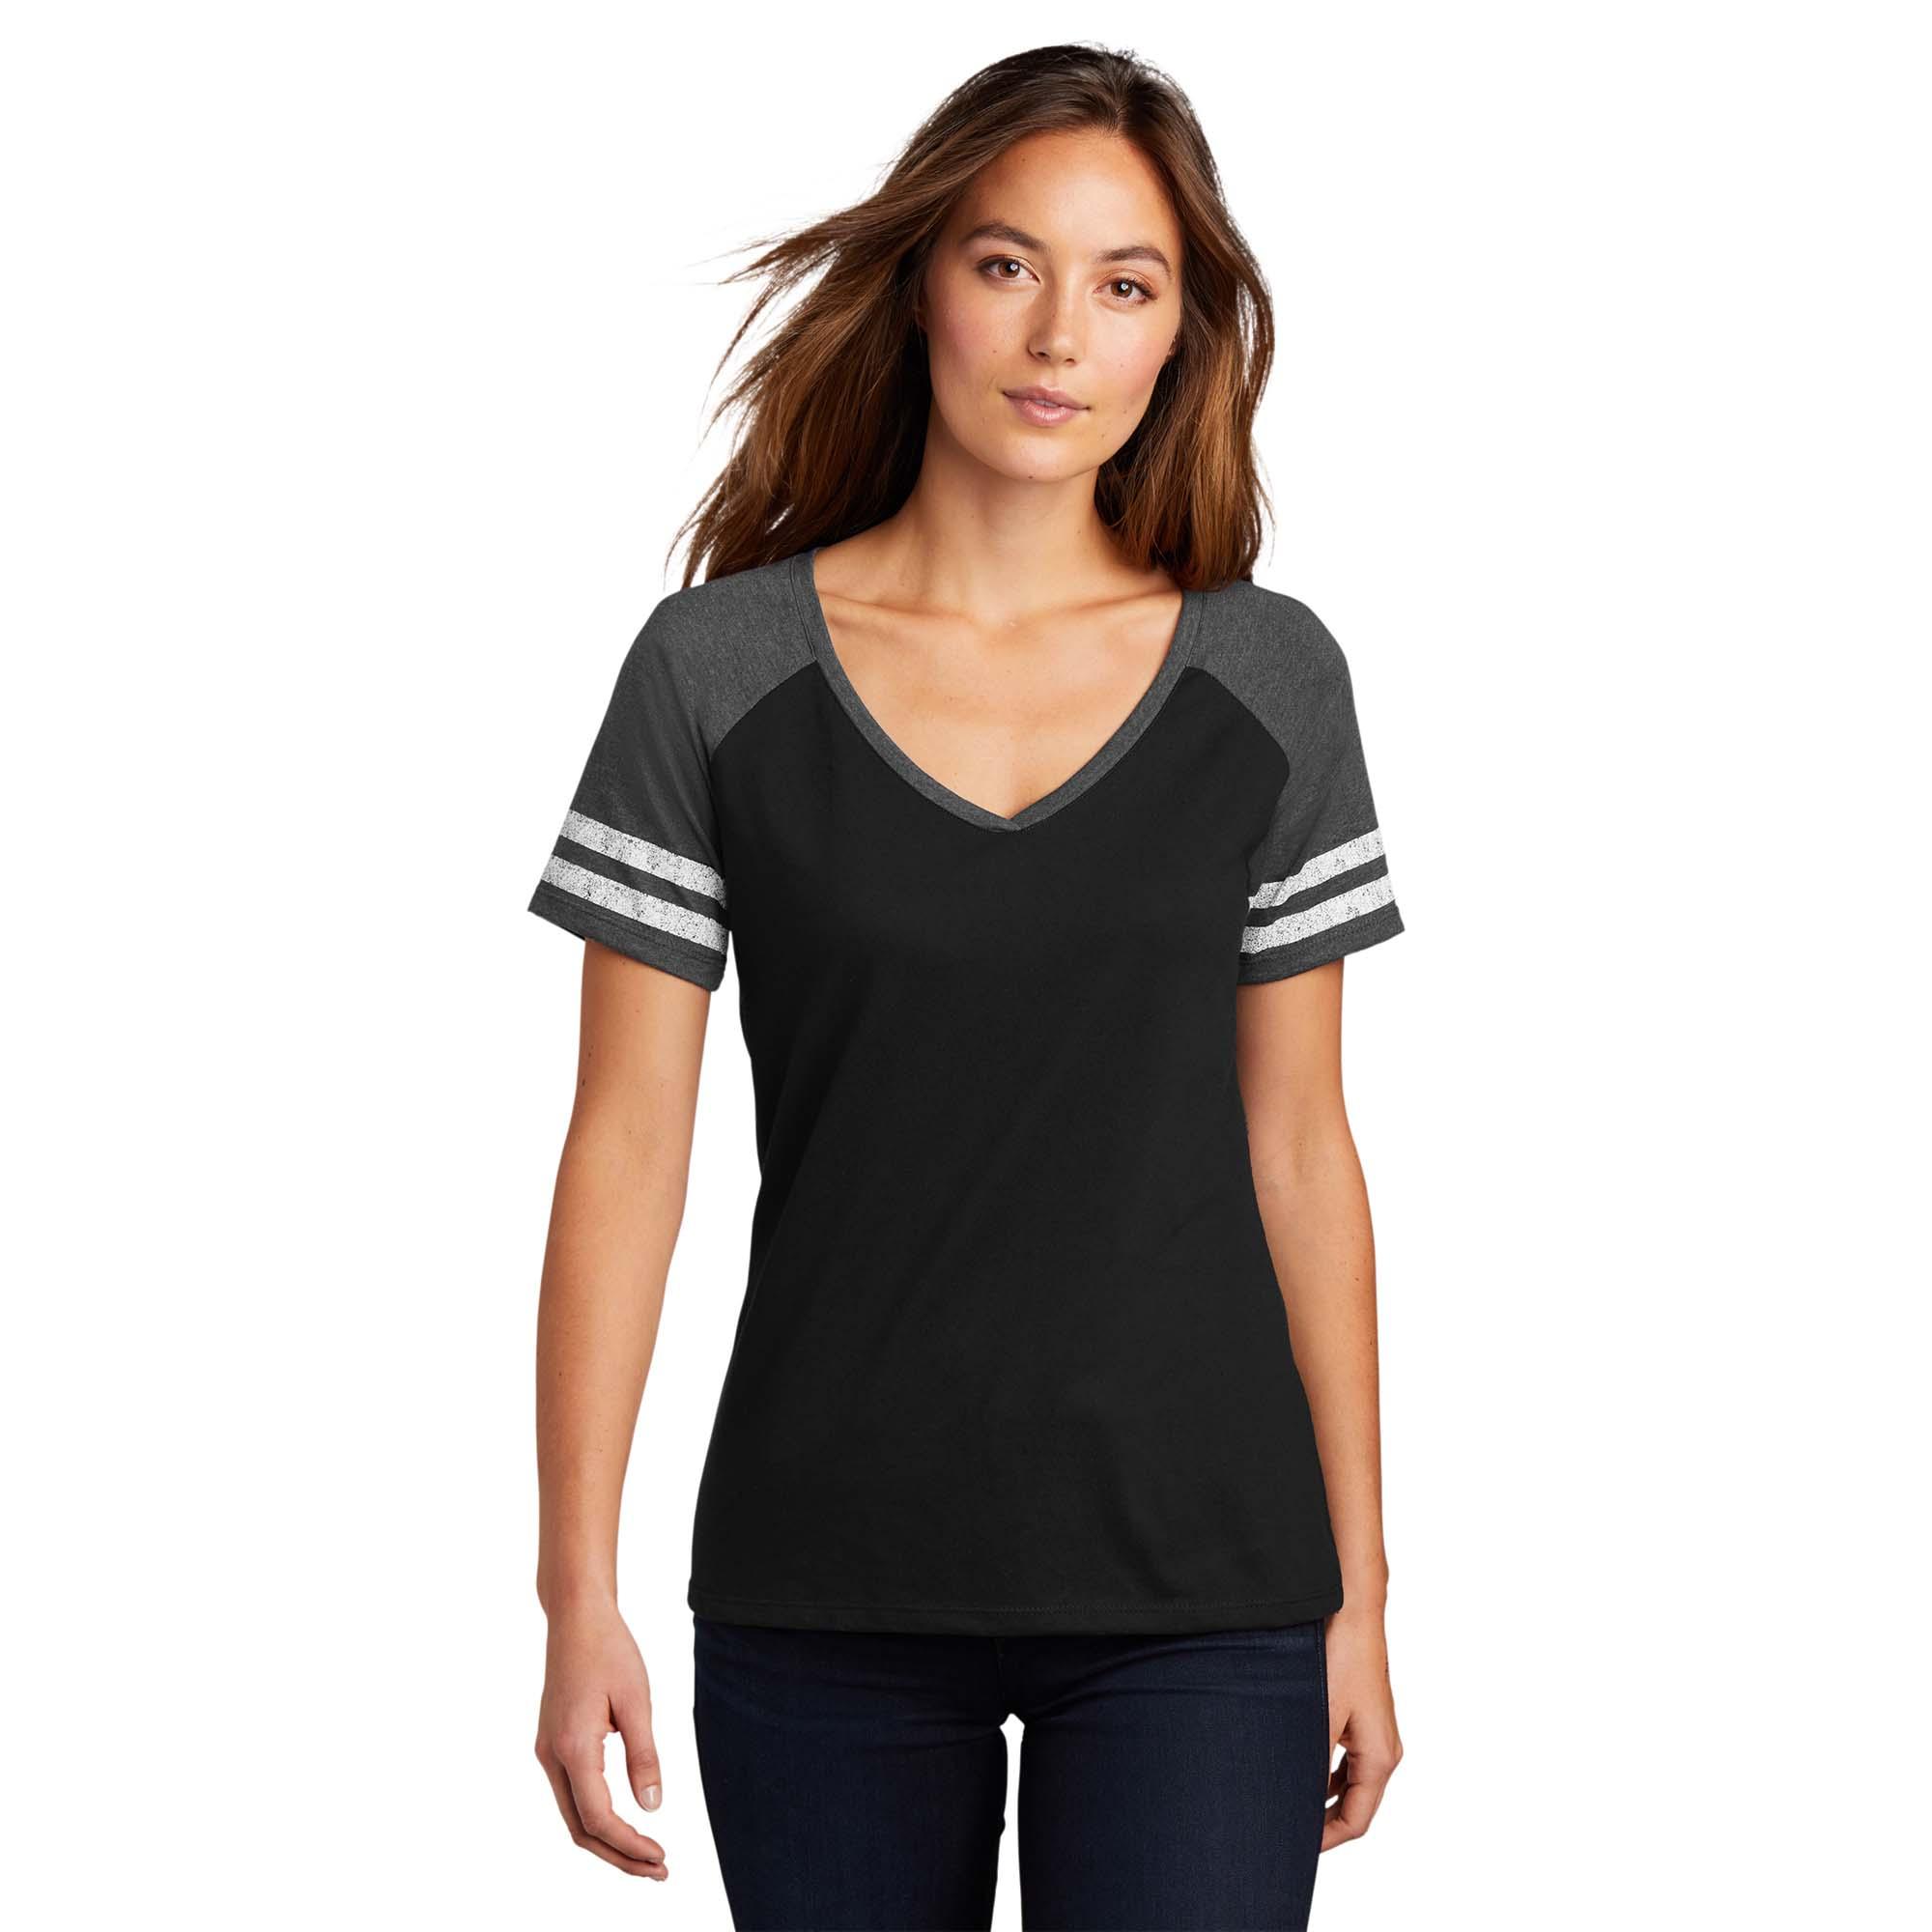 District DM476 Women's Game V-Neck Tee - Black/Heathered Charcoal ...